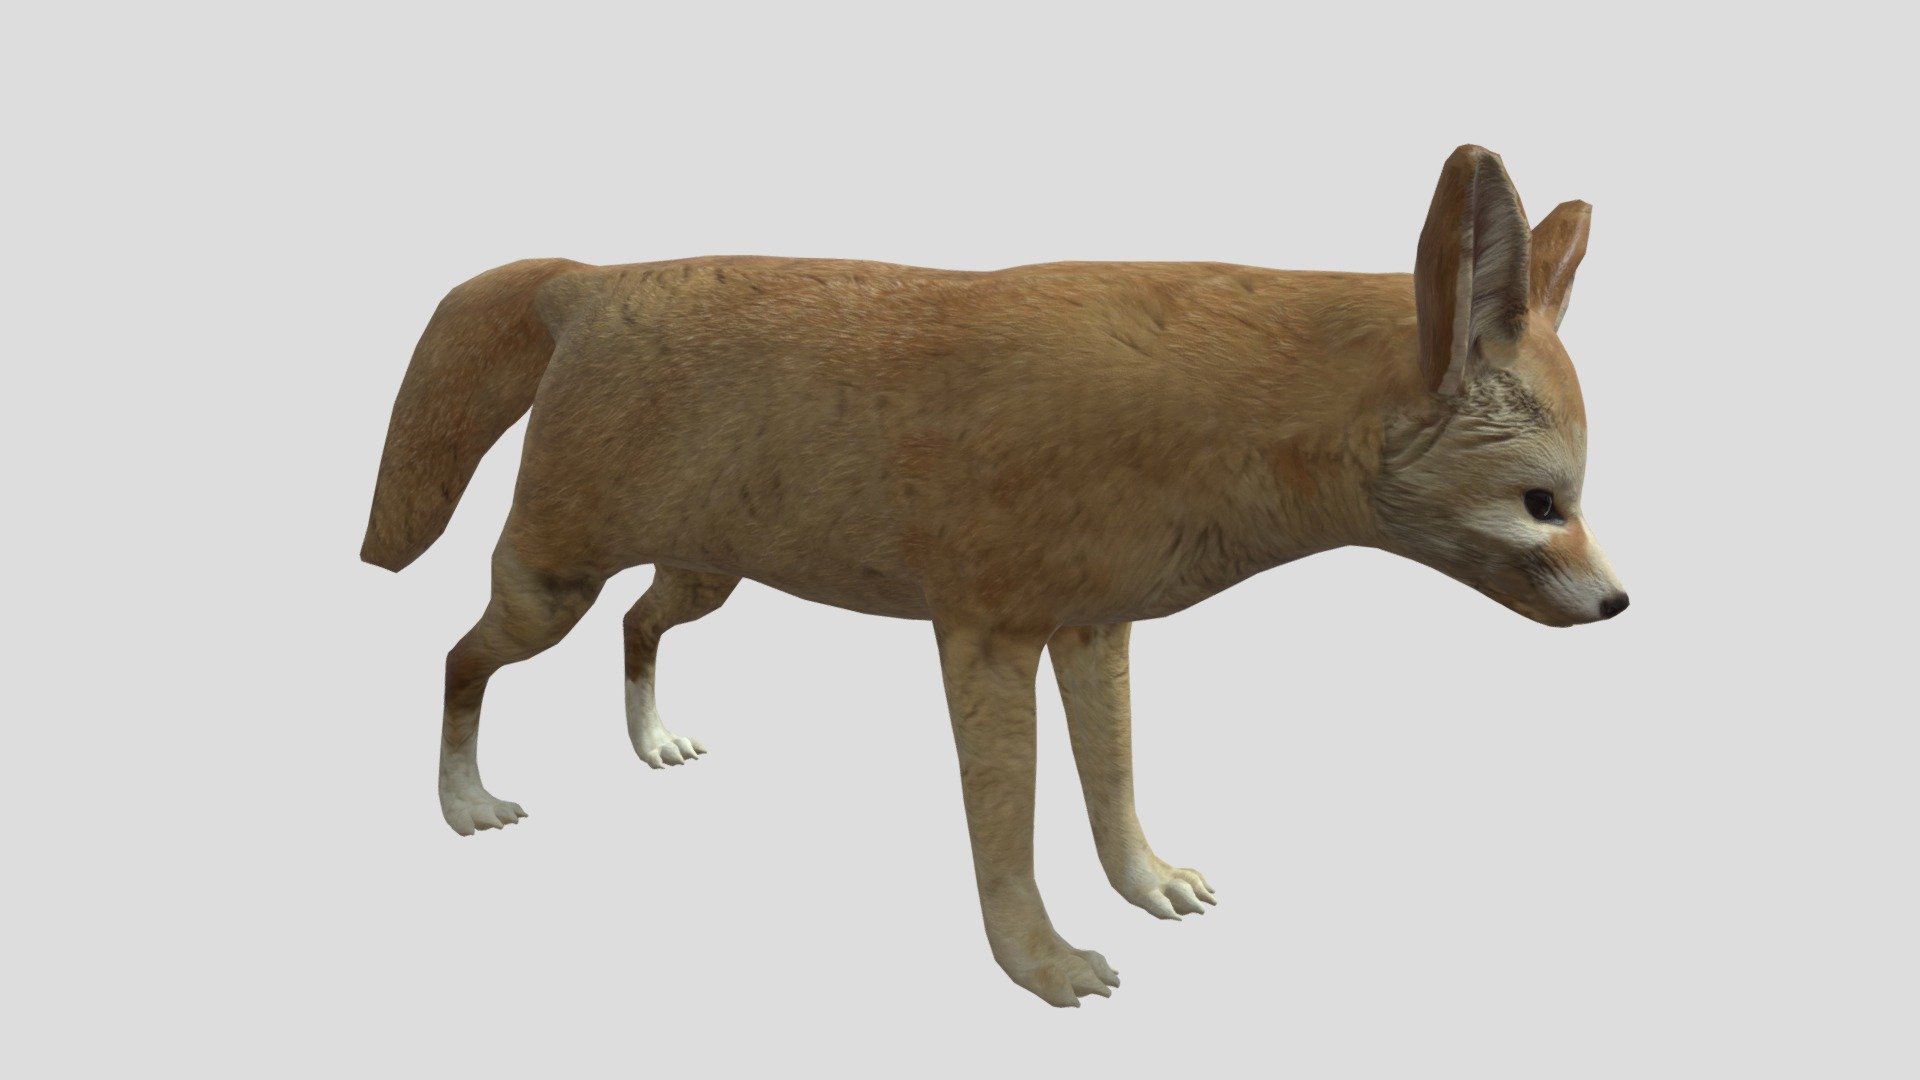 Digital 3d model of Fennec fox. .

The product includes:

-All textures and materials are mapped in every format.

-Textures JPEG- color,normal,specular and roughness maps.

-Texture size 4096 x 4096 pxls.

-No special plugin needed to open scene 3d model